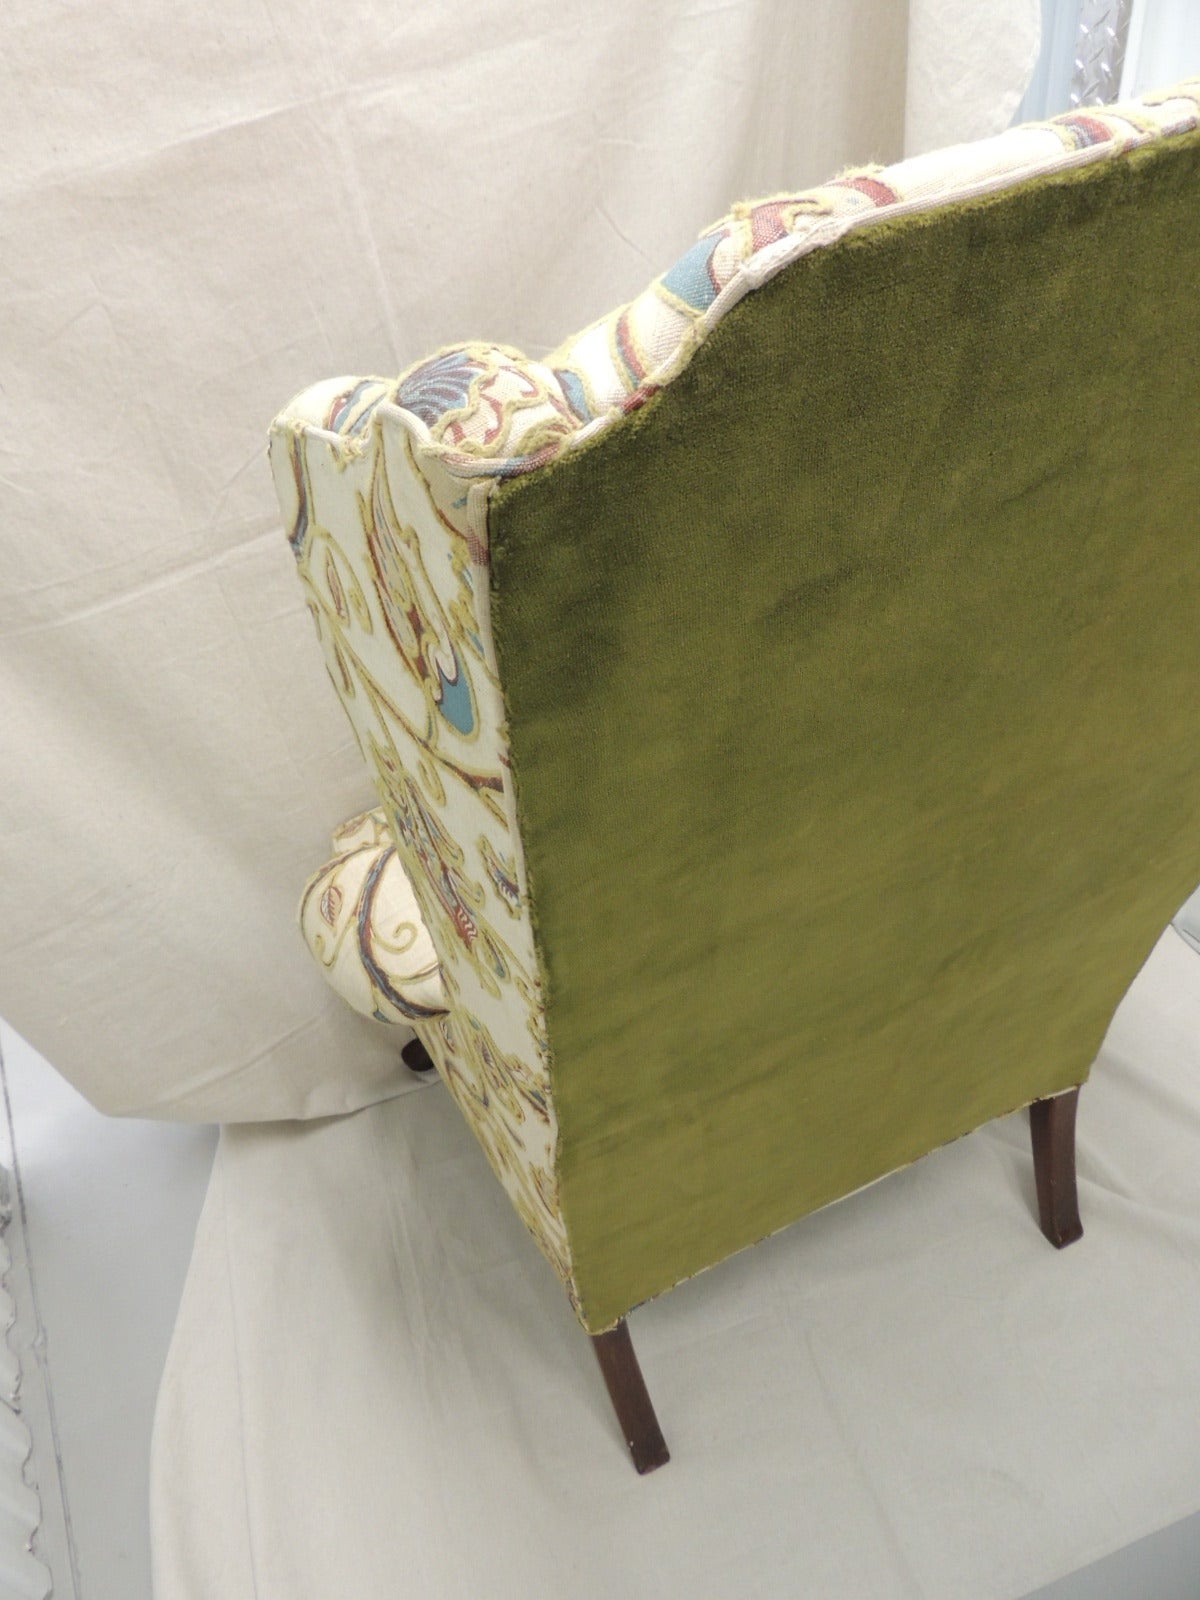 George I Wing Chair Upholstered in Crewel Work Embroidery 